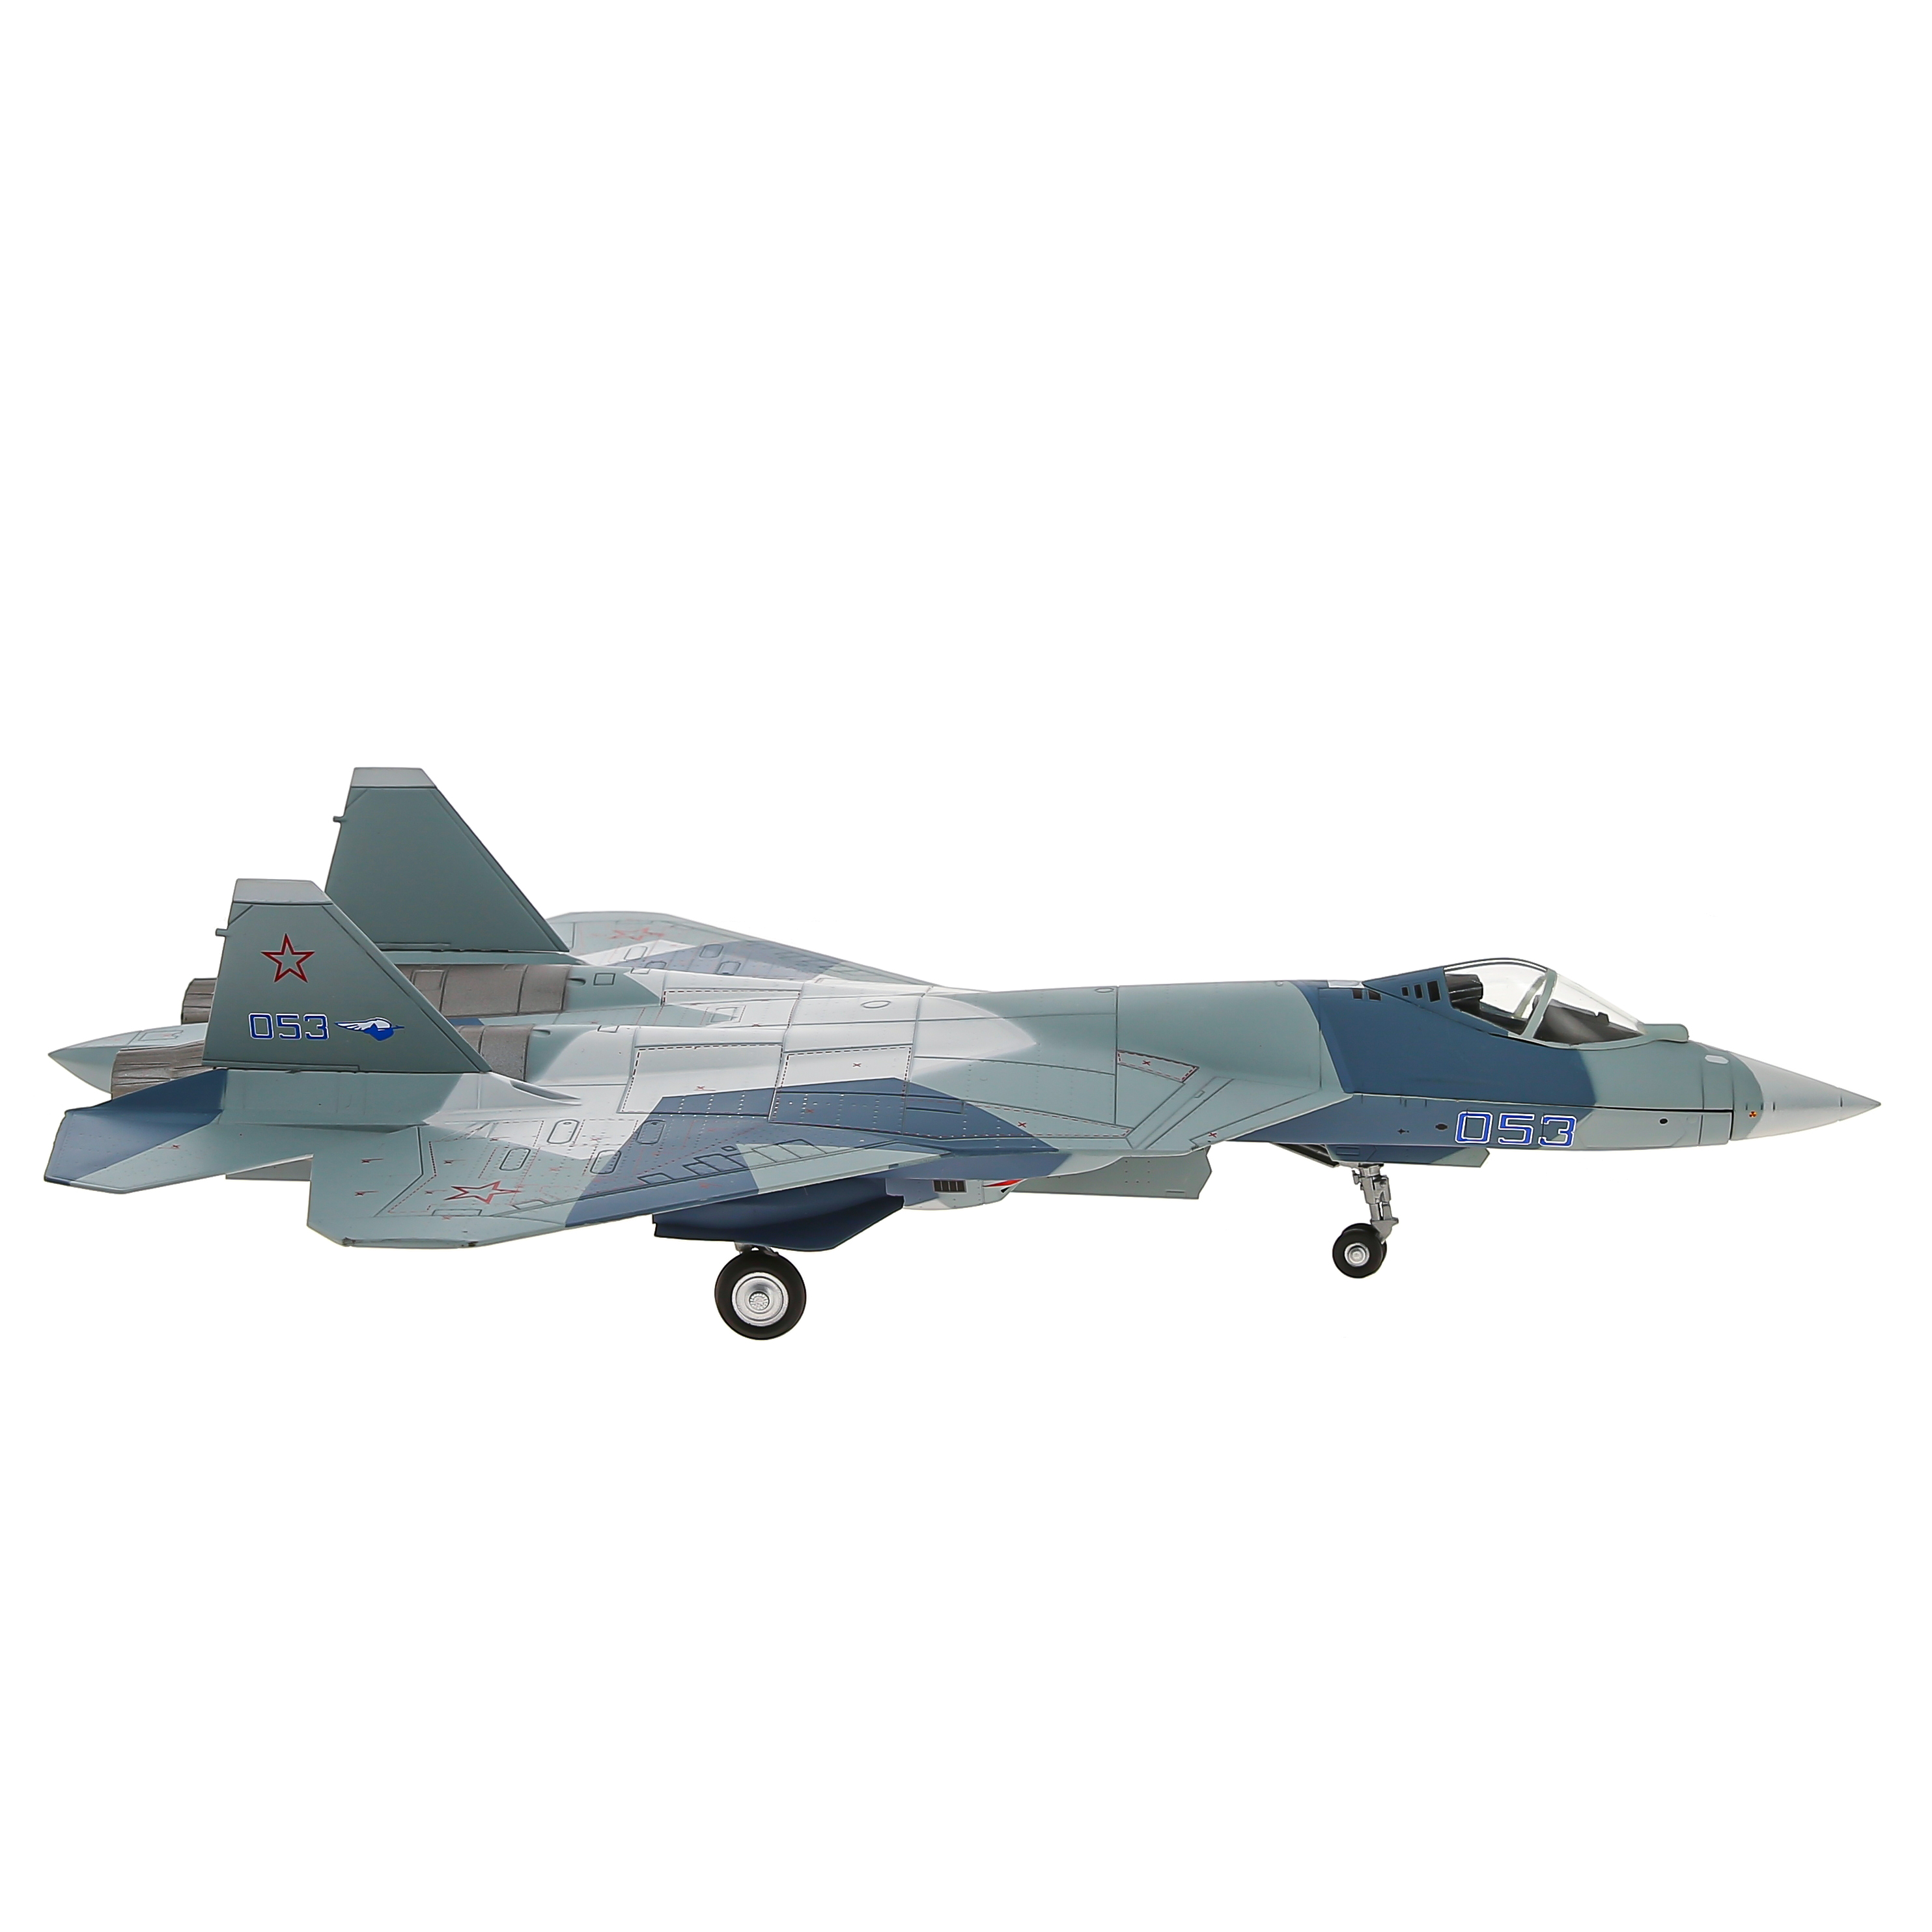       -57 (-50), ,  1:72.  28 . Model of the fifth-generation fighter aircraft of Russia Su-57 (T-50), metal, scale 1:72. Length 28 cm. # 3 hobbyplus.ru